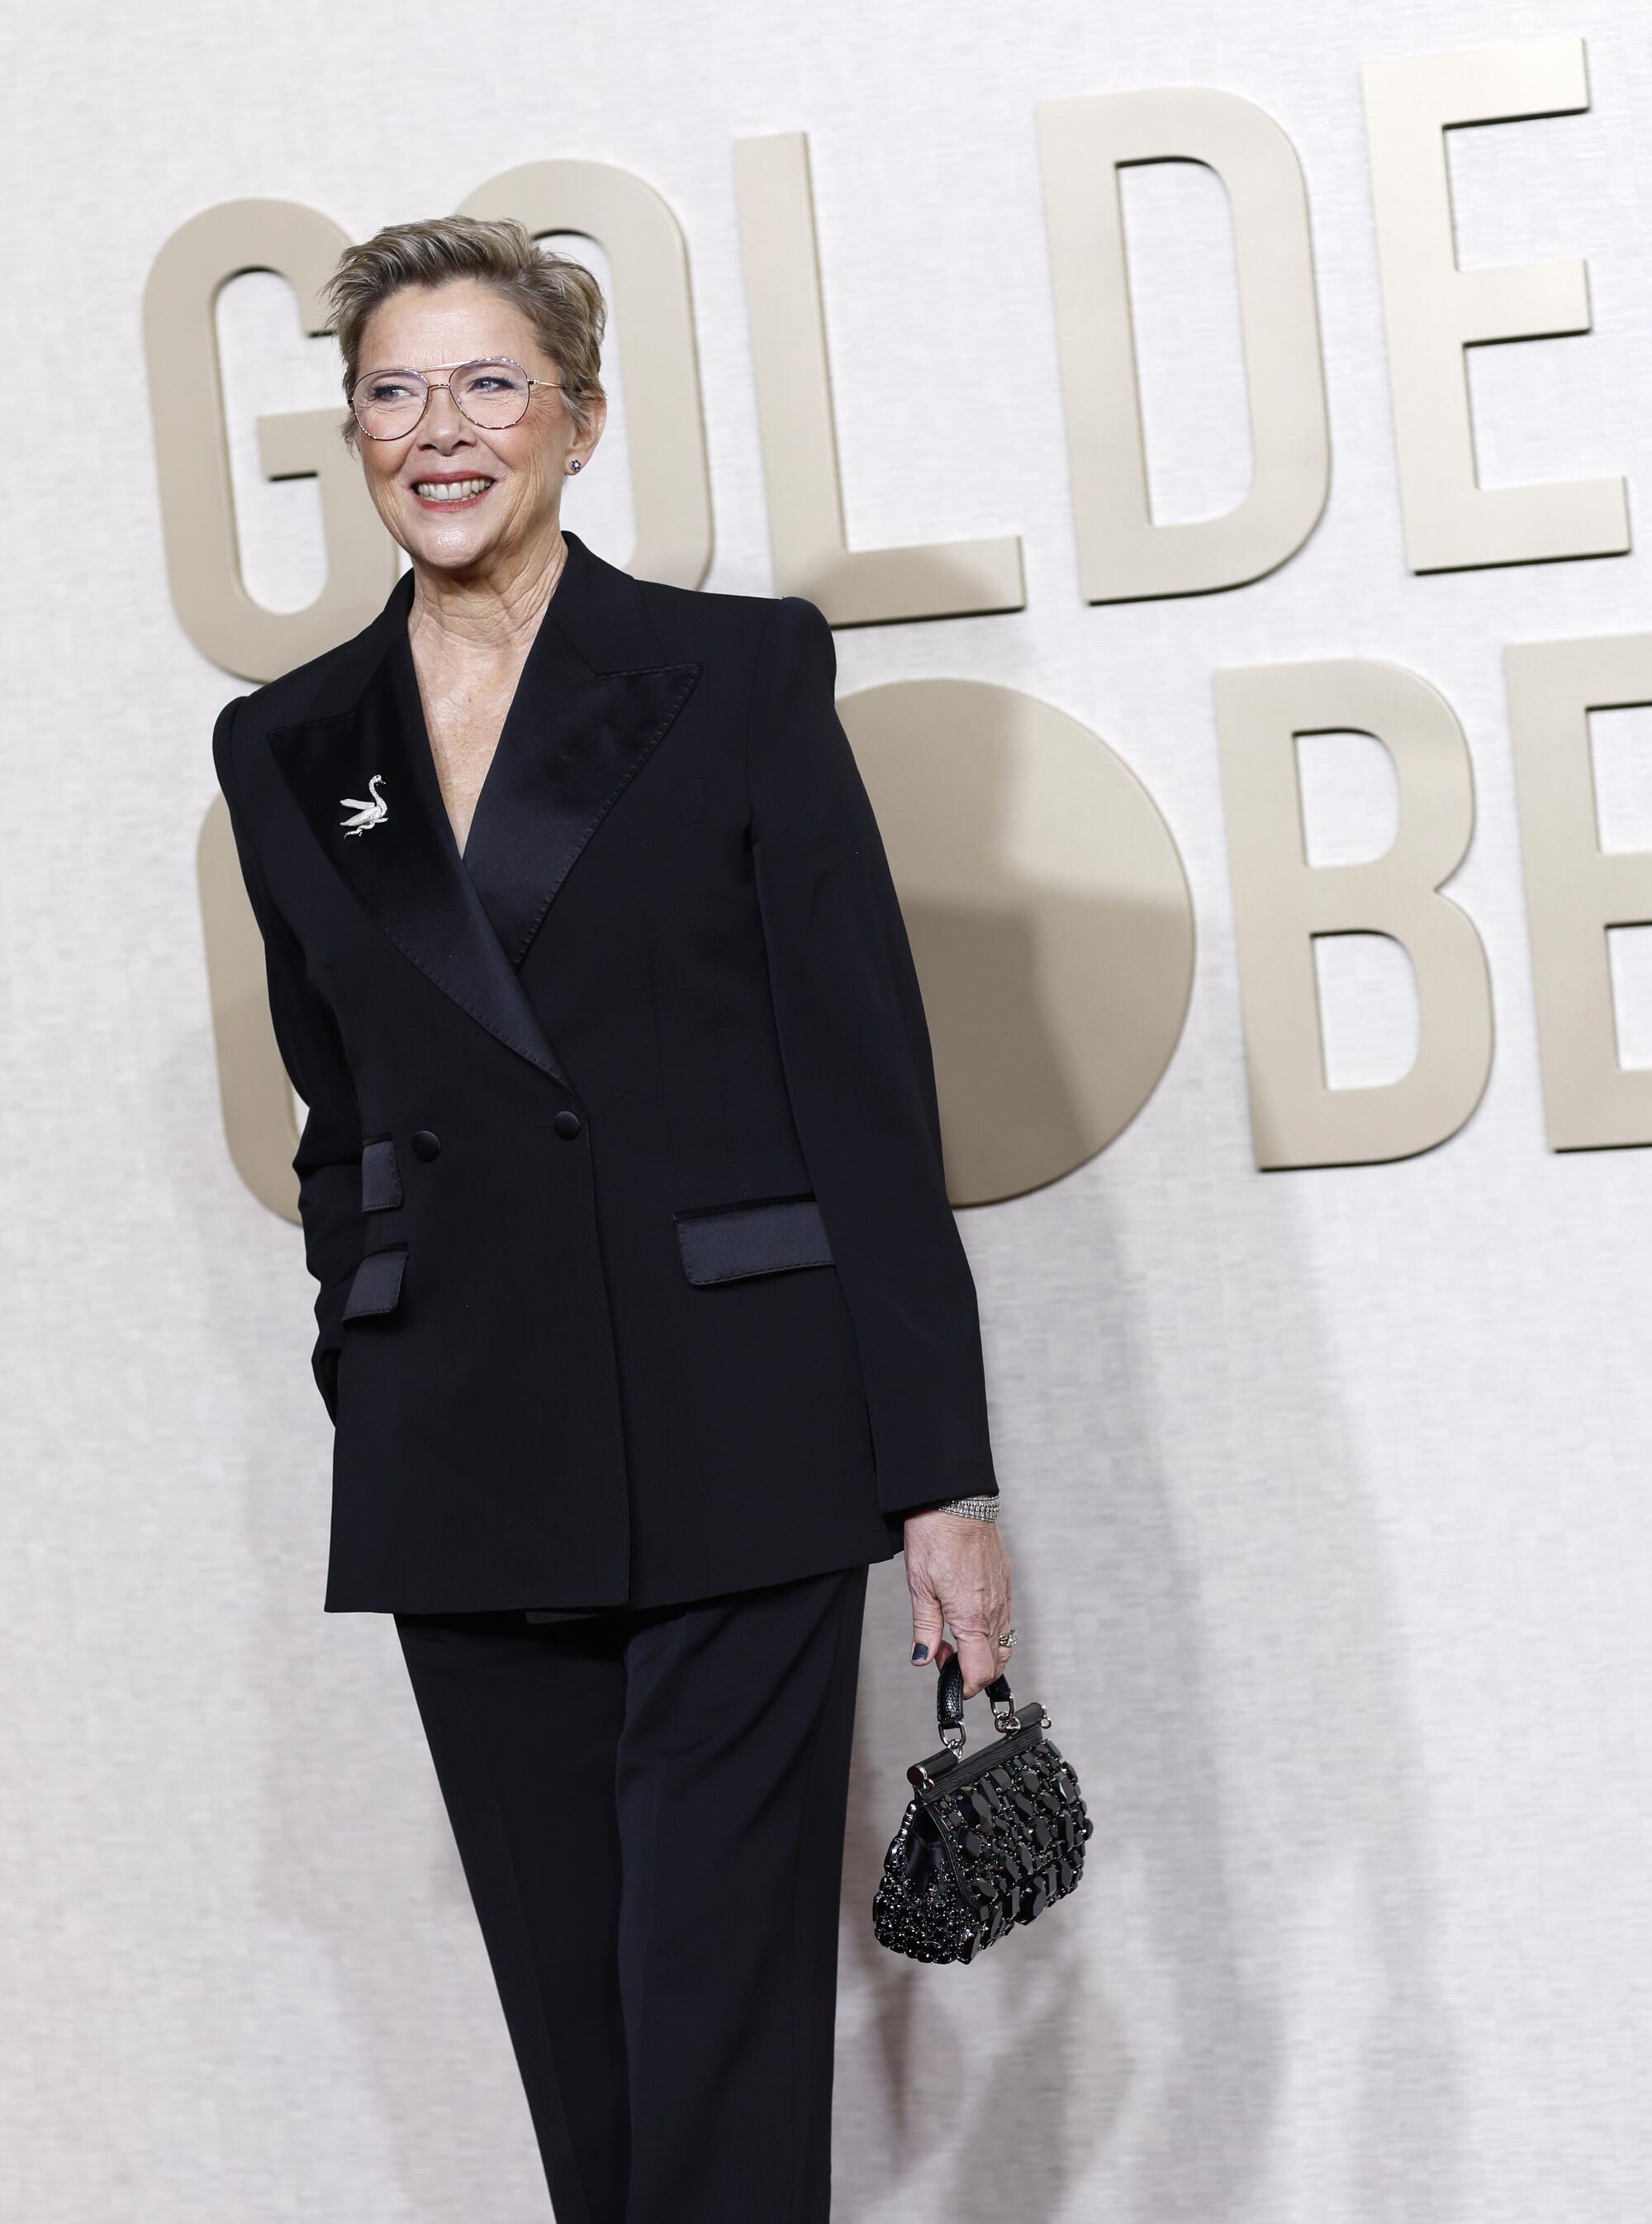 Annette Bening on the red carpet of the 81st Annual Golden Globe Awards held at the Beverly Hilton Hotel